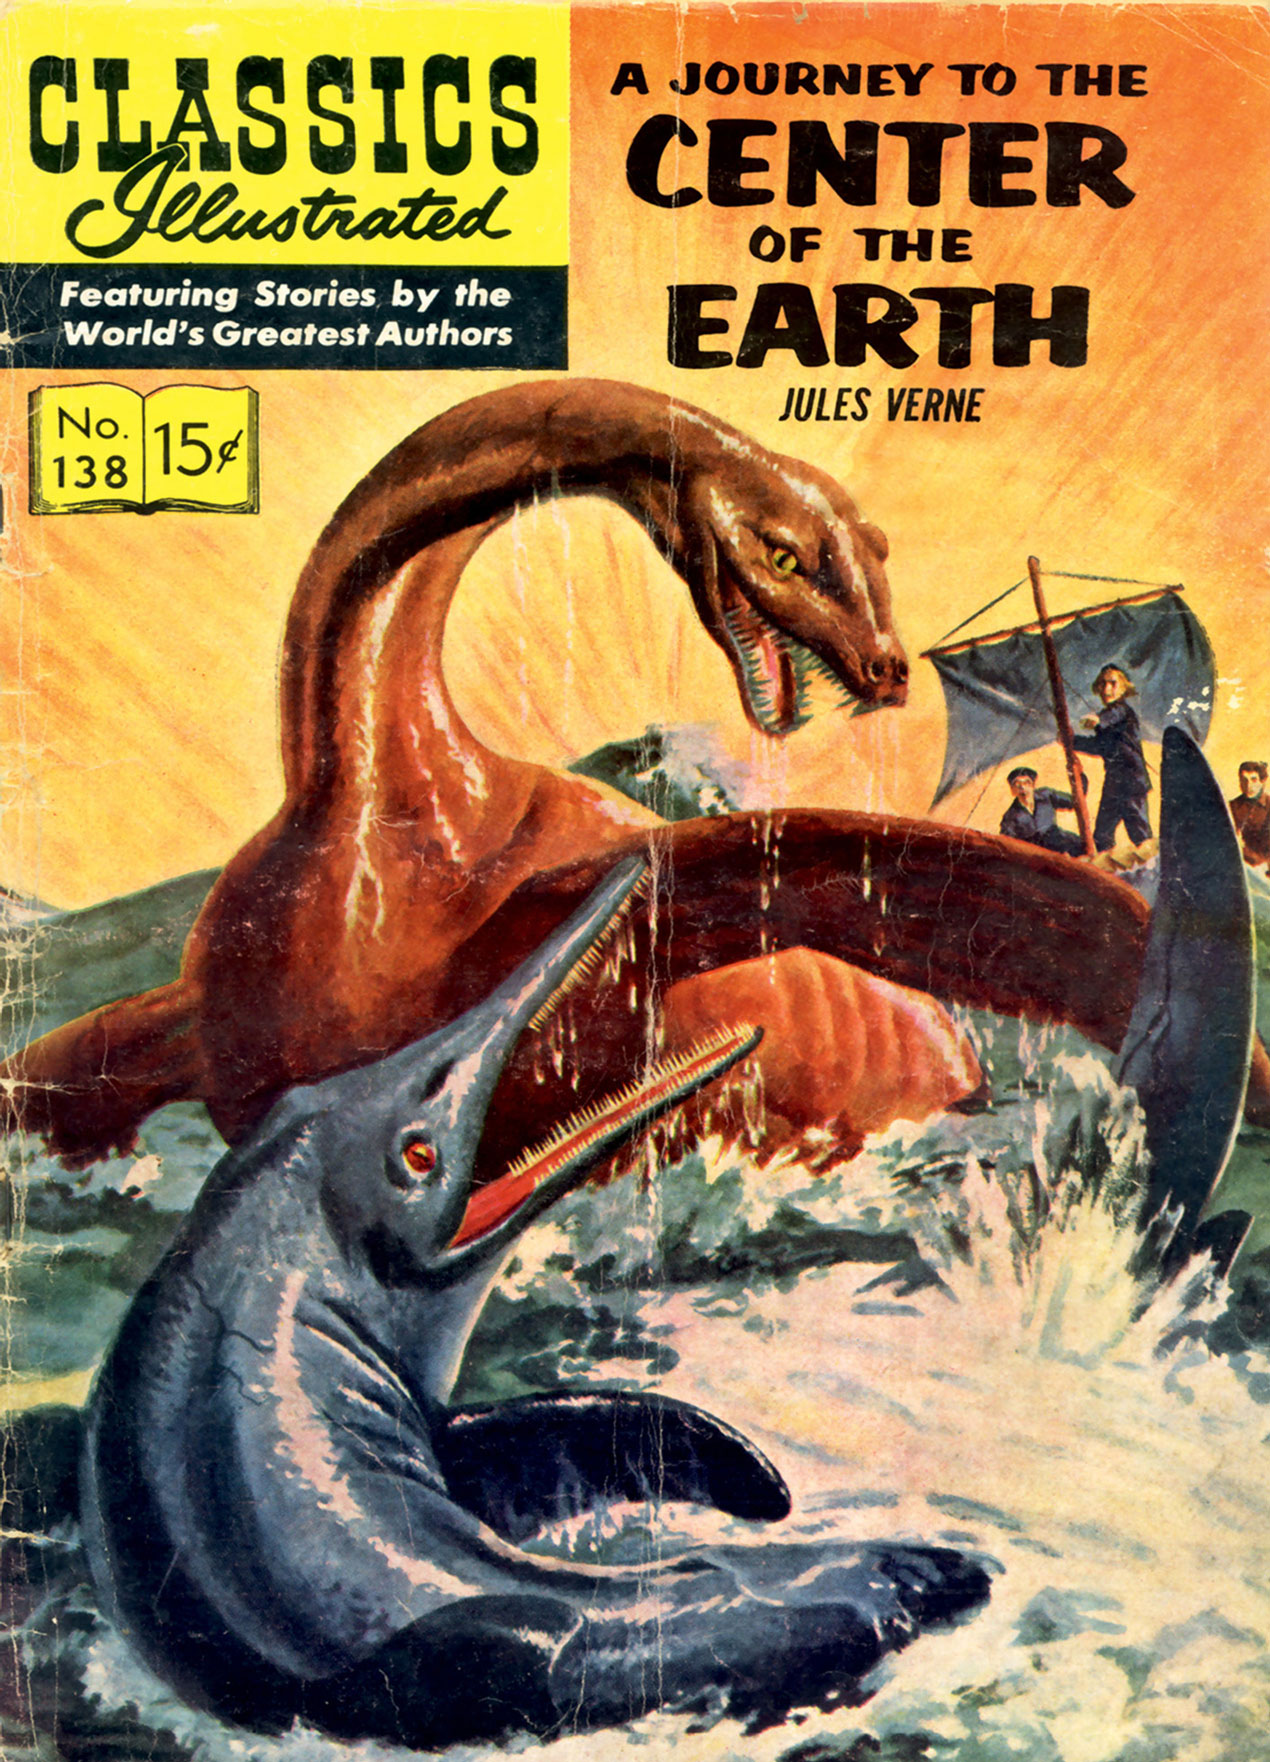 An image of the nineteen fifty-seven “Classics Illustrated” comic book edition of Jules Verne’s “A Journey to the Center of the Earth.”